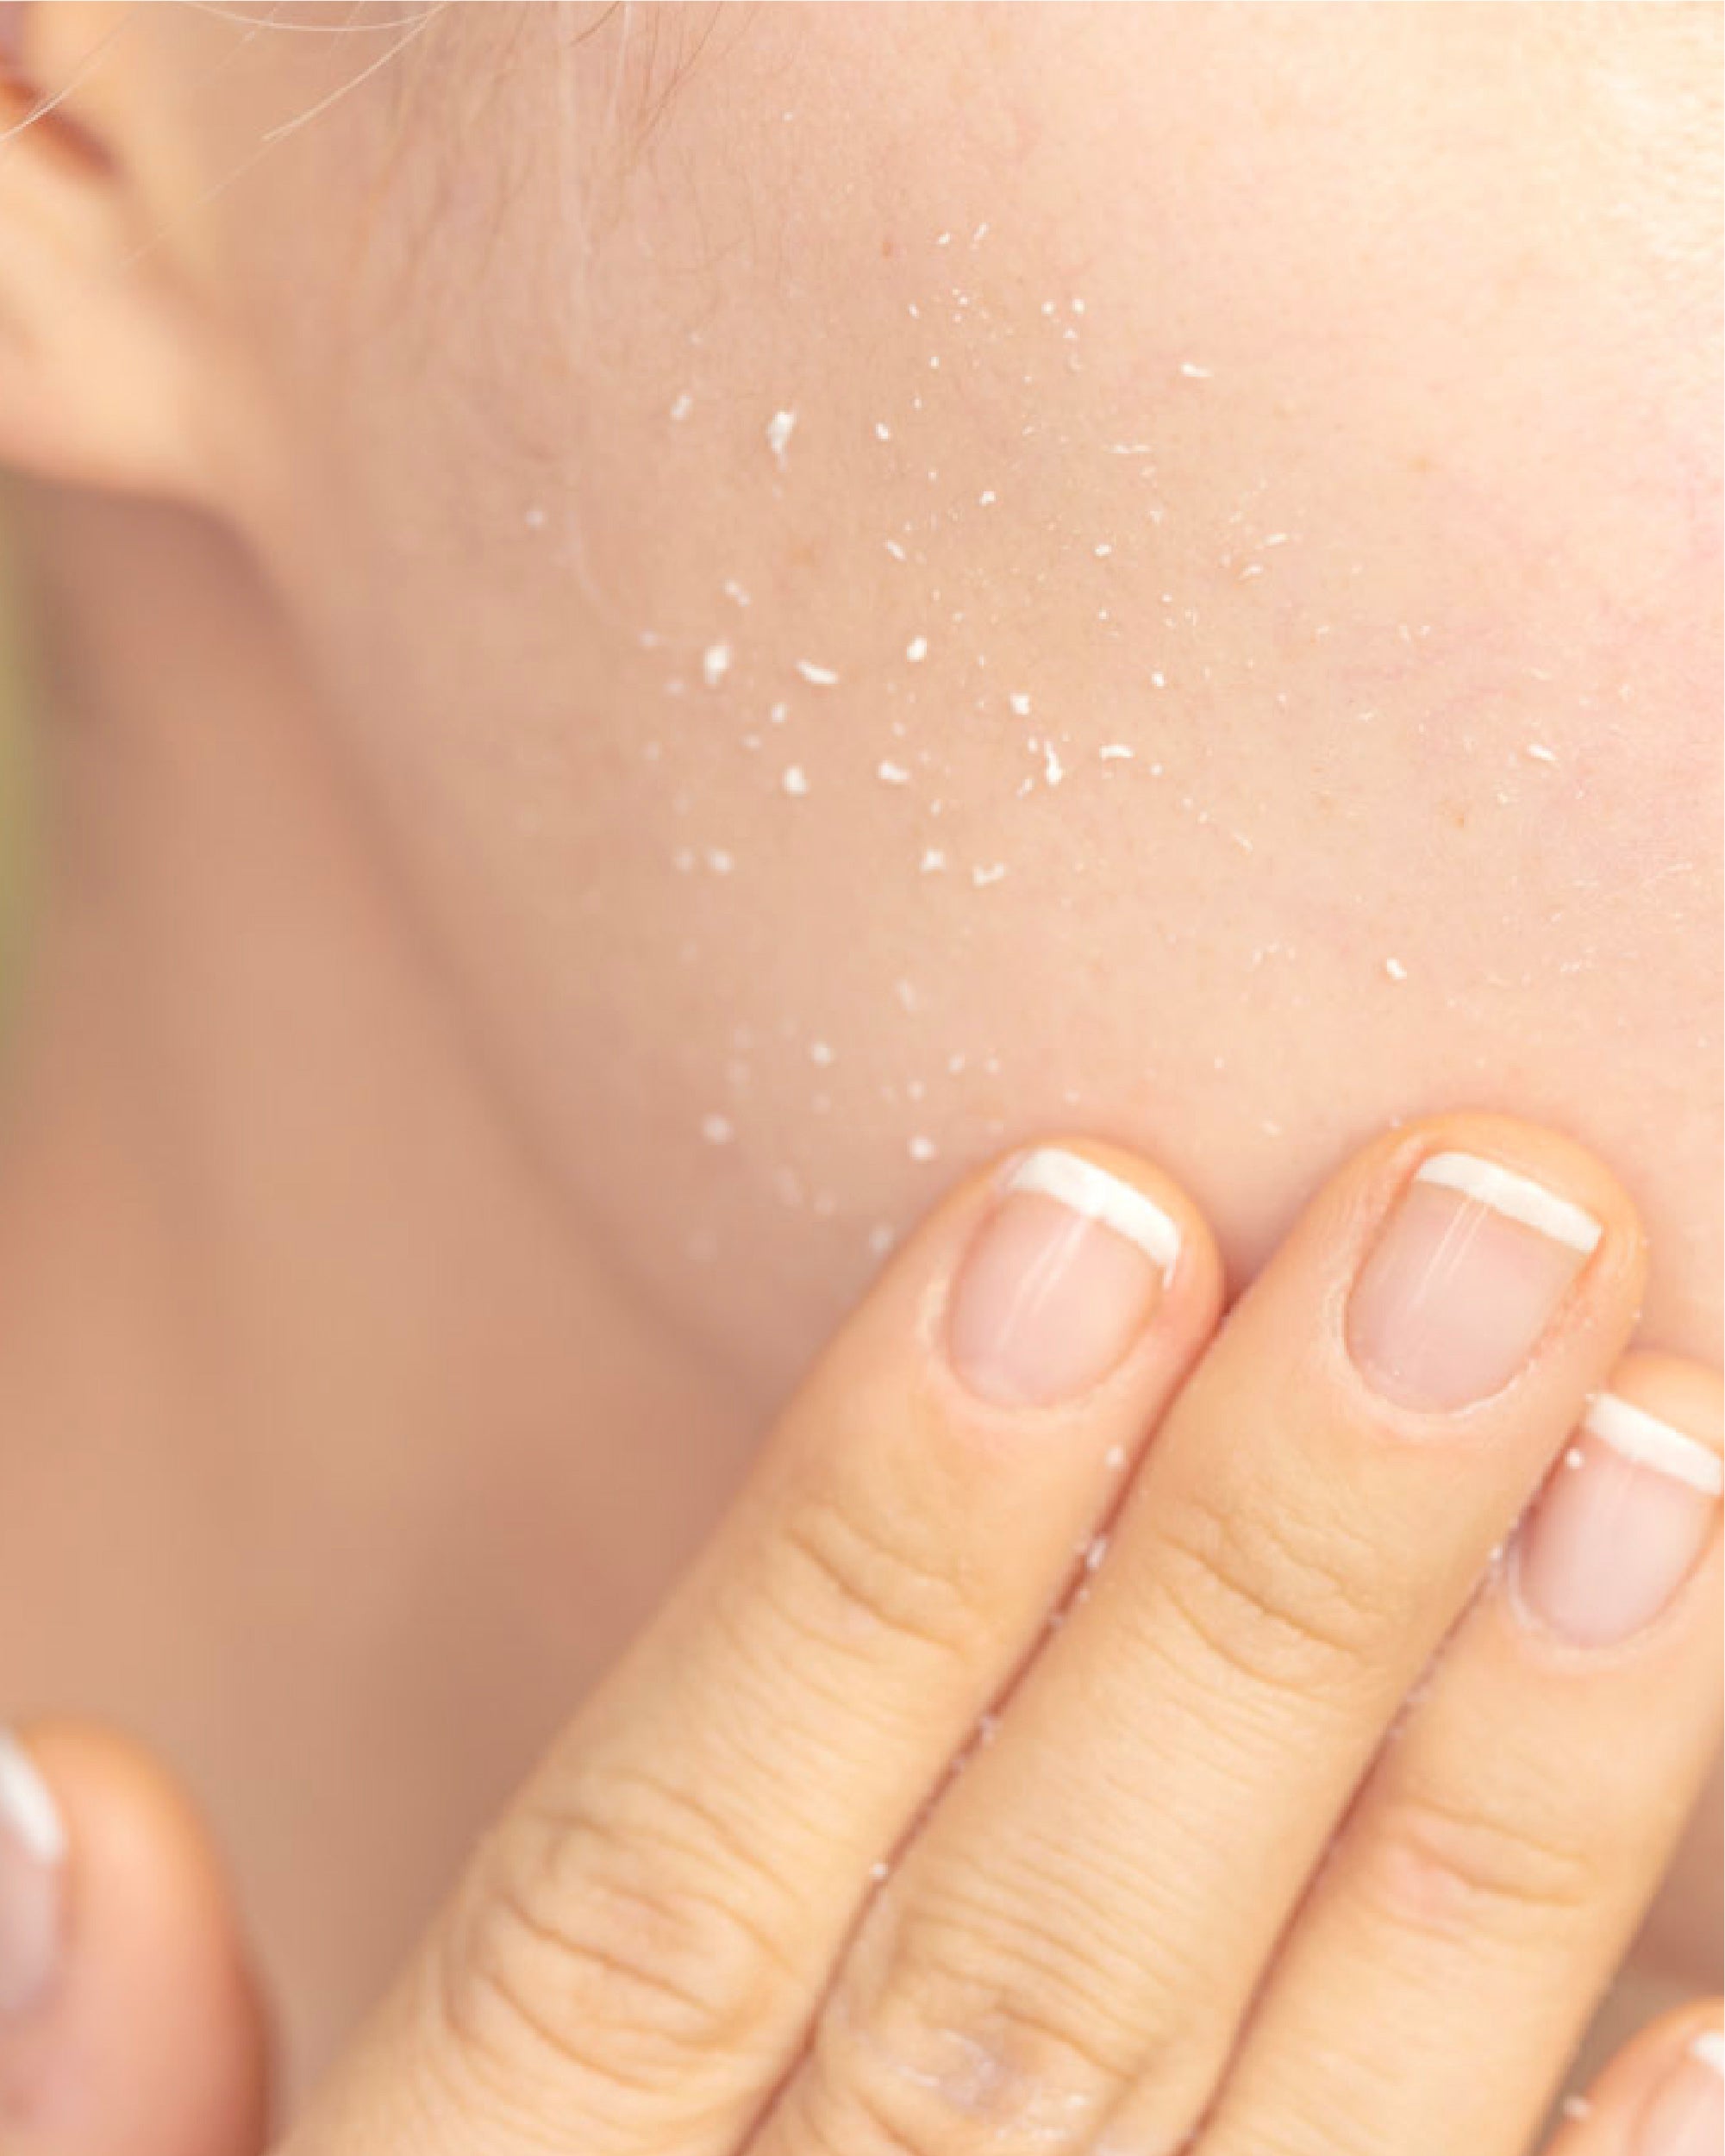 gentle aqua gel exfoliator reacts to dead skin cells and turns to white beads on face